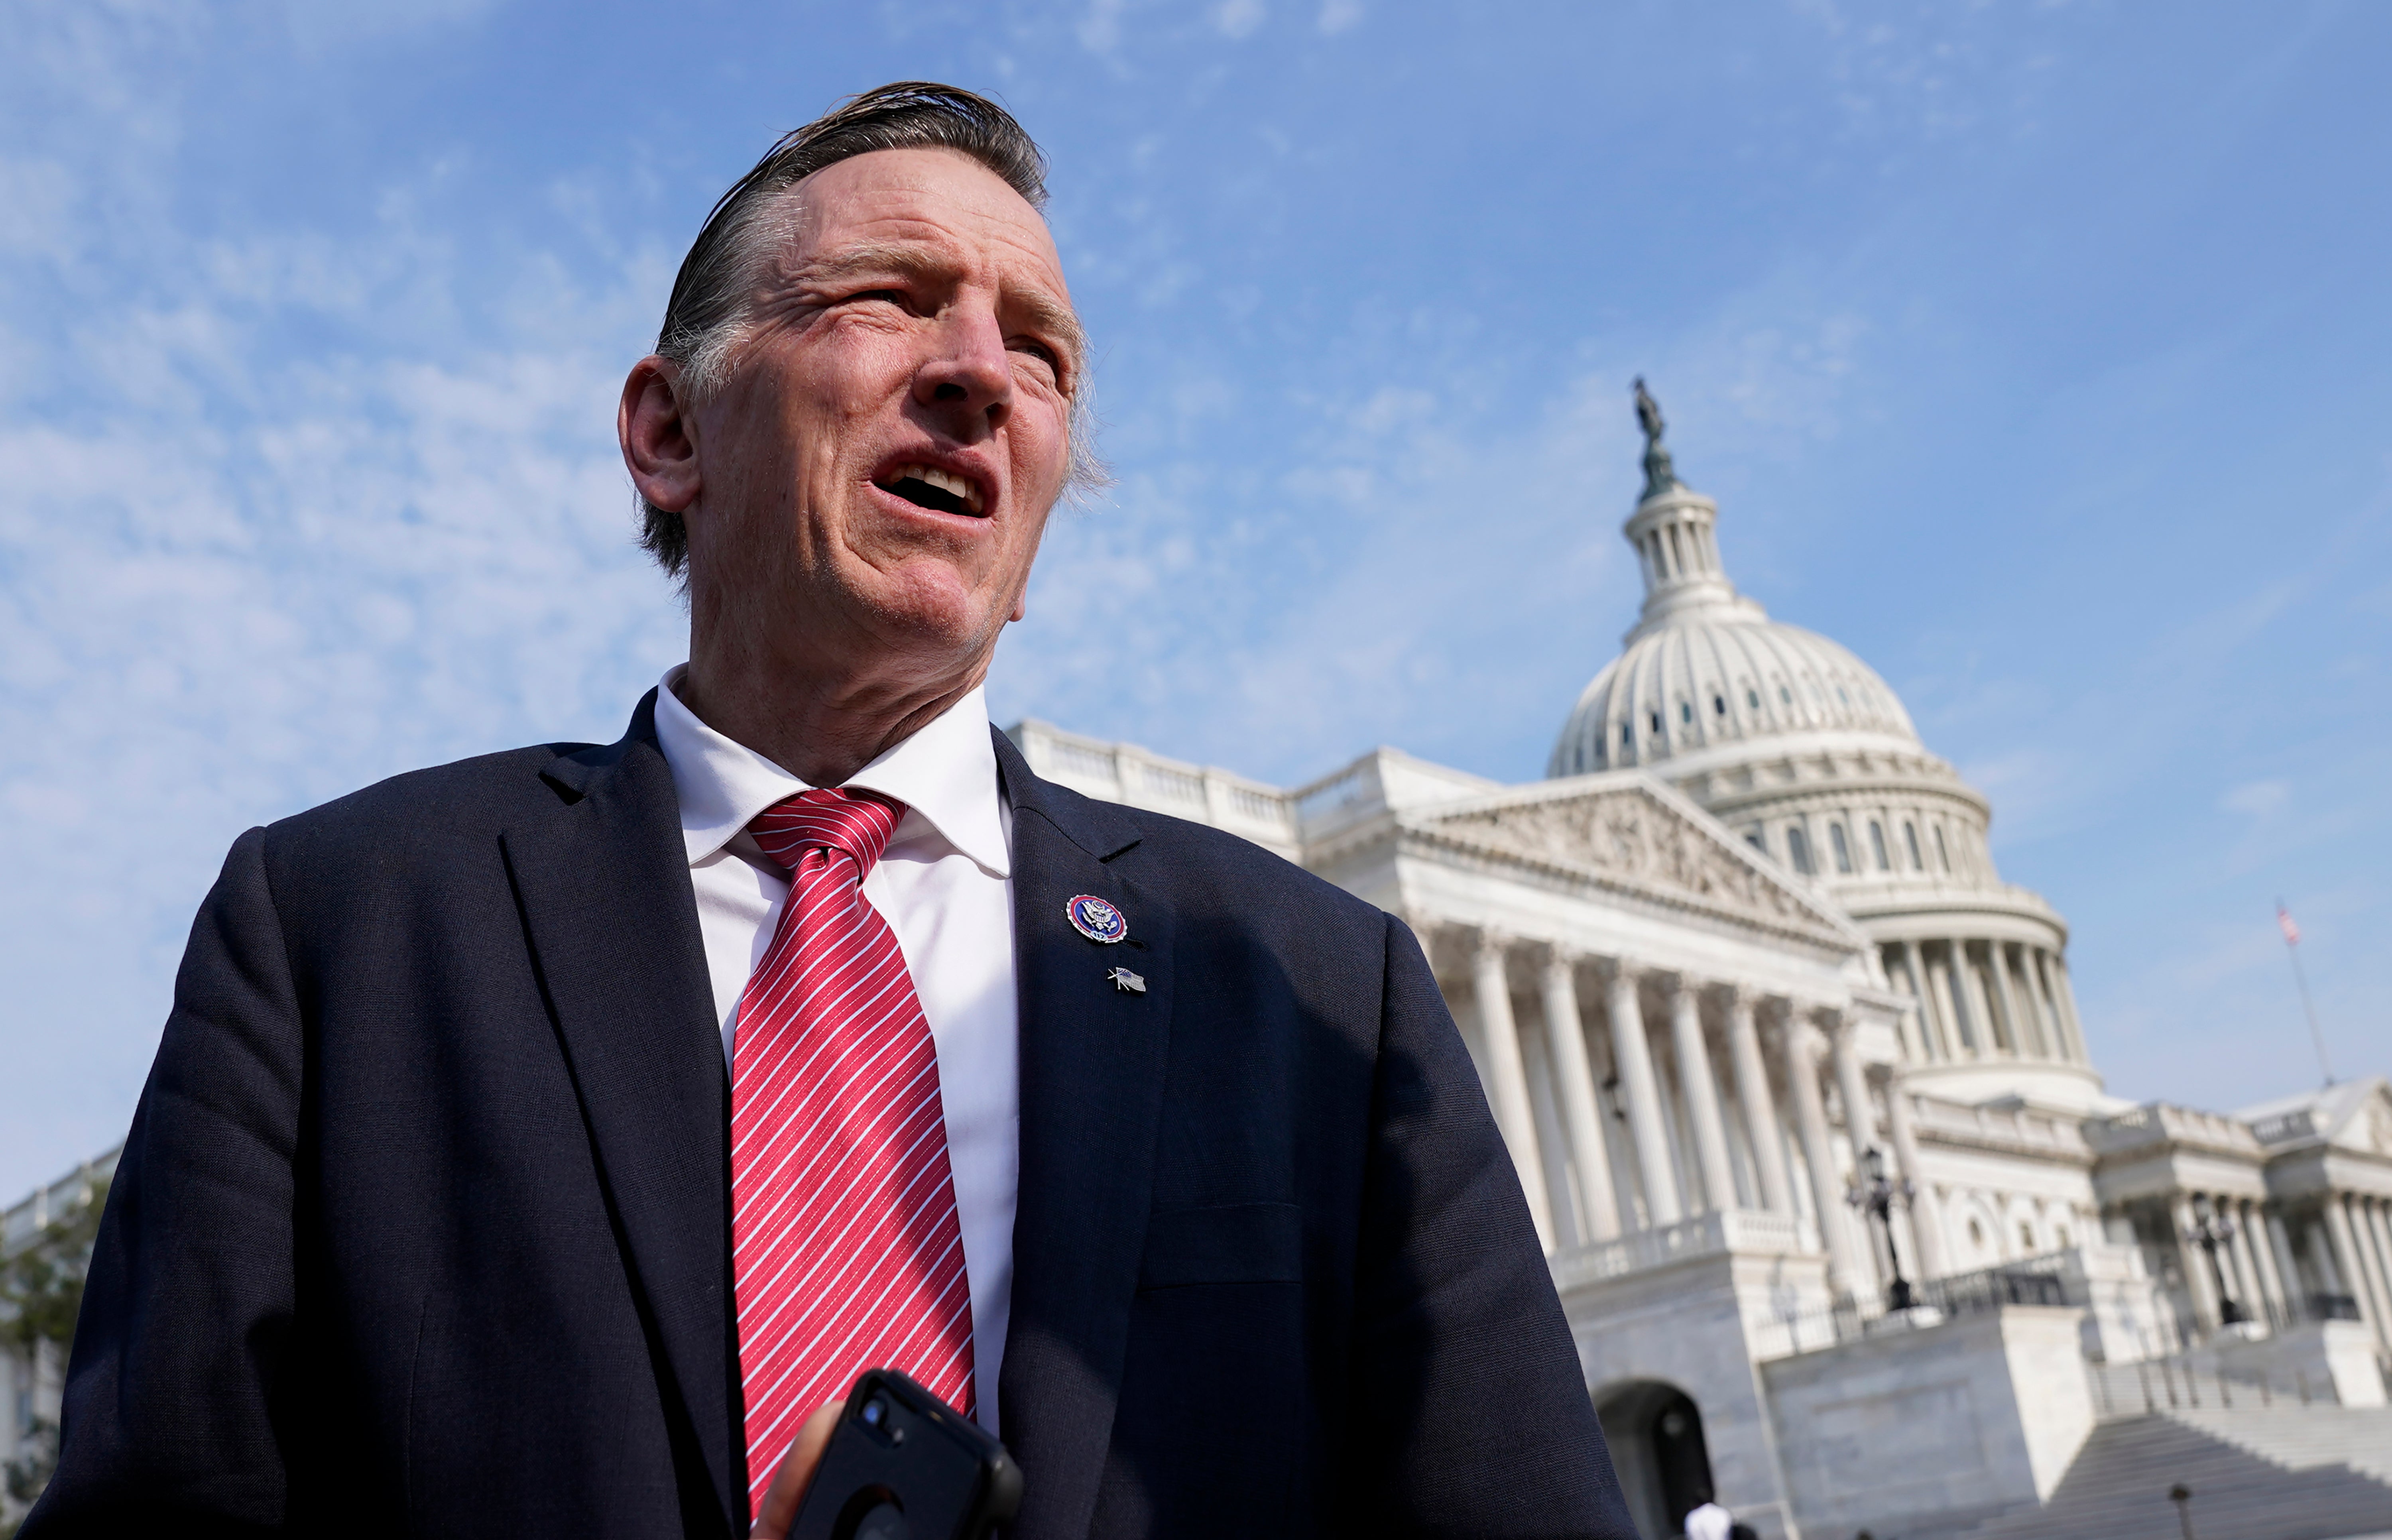 Paul Gosar has frequently courted controversy during his time in Congress